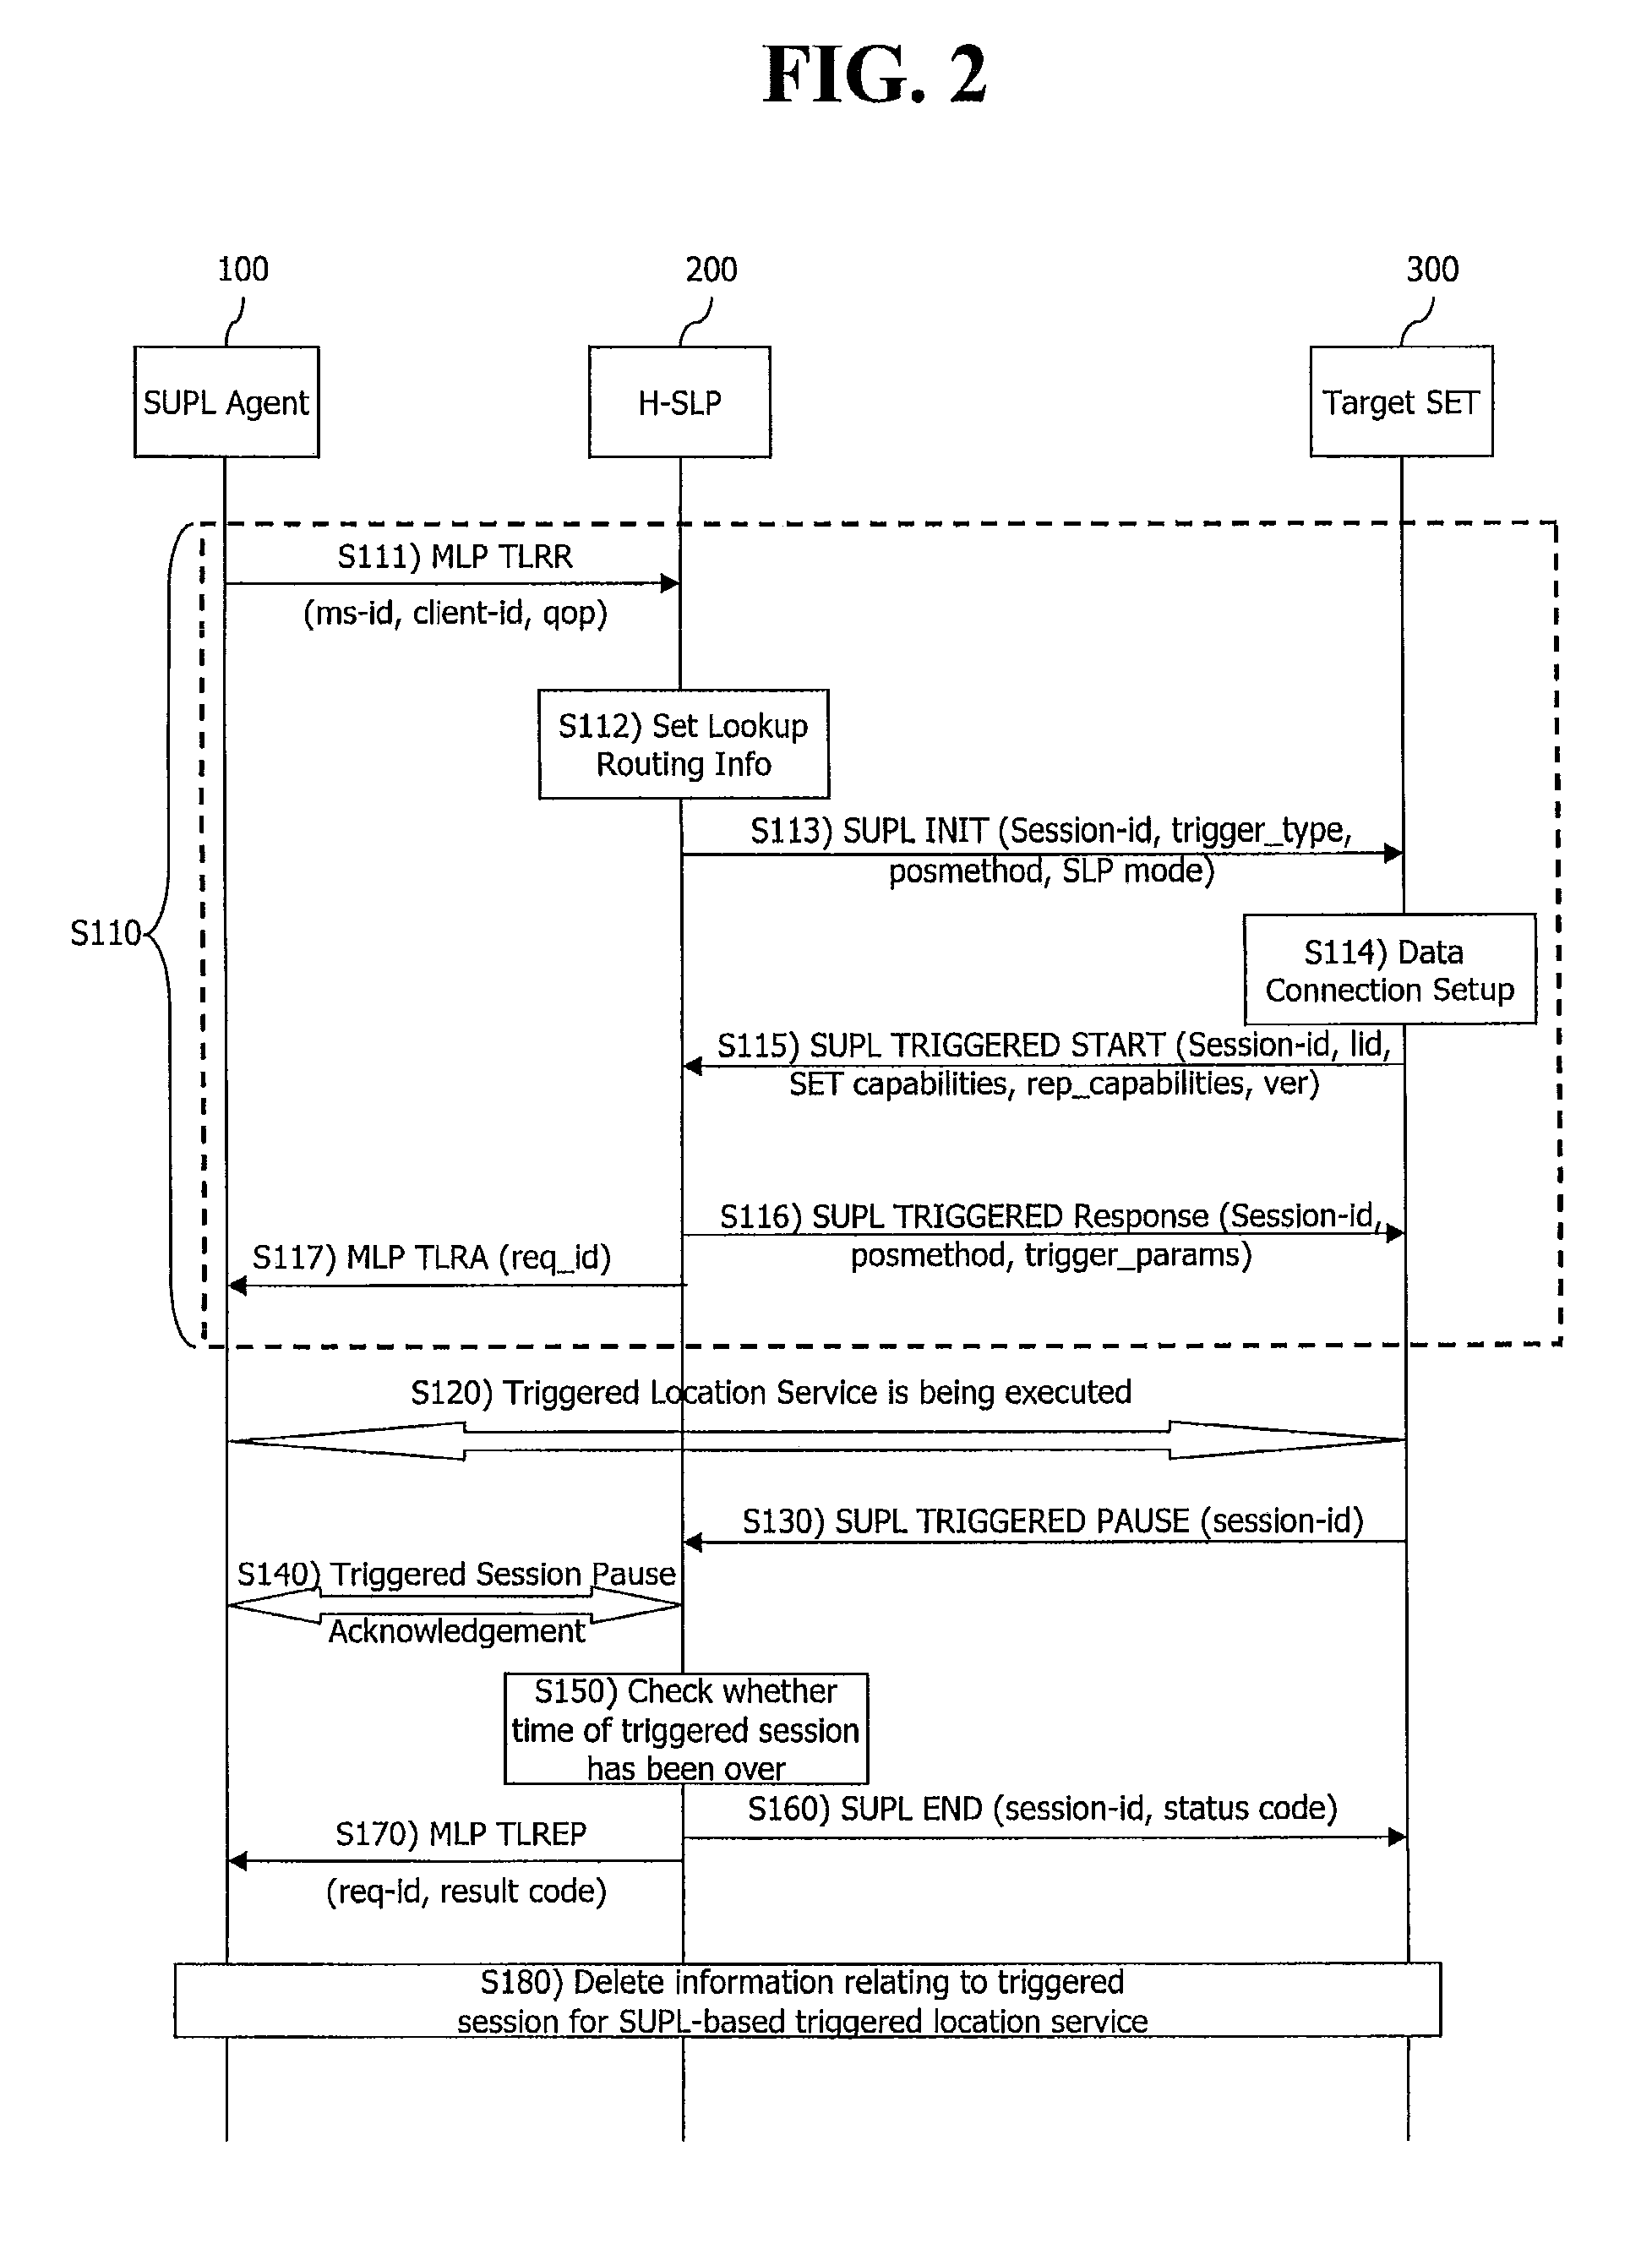 Method for performing supl based location service